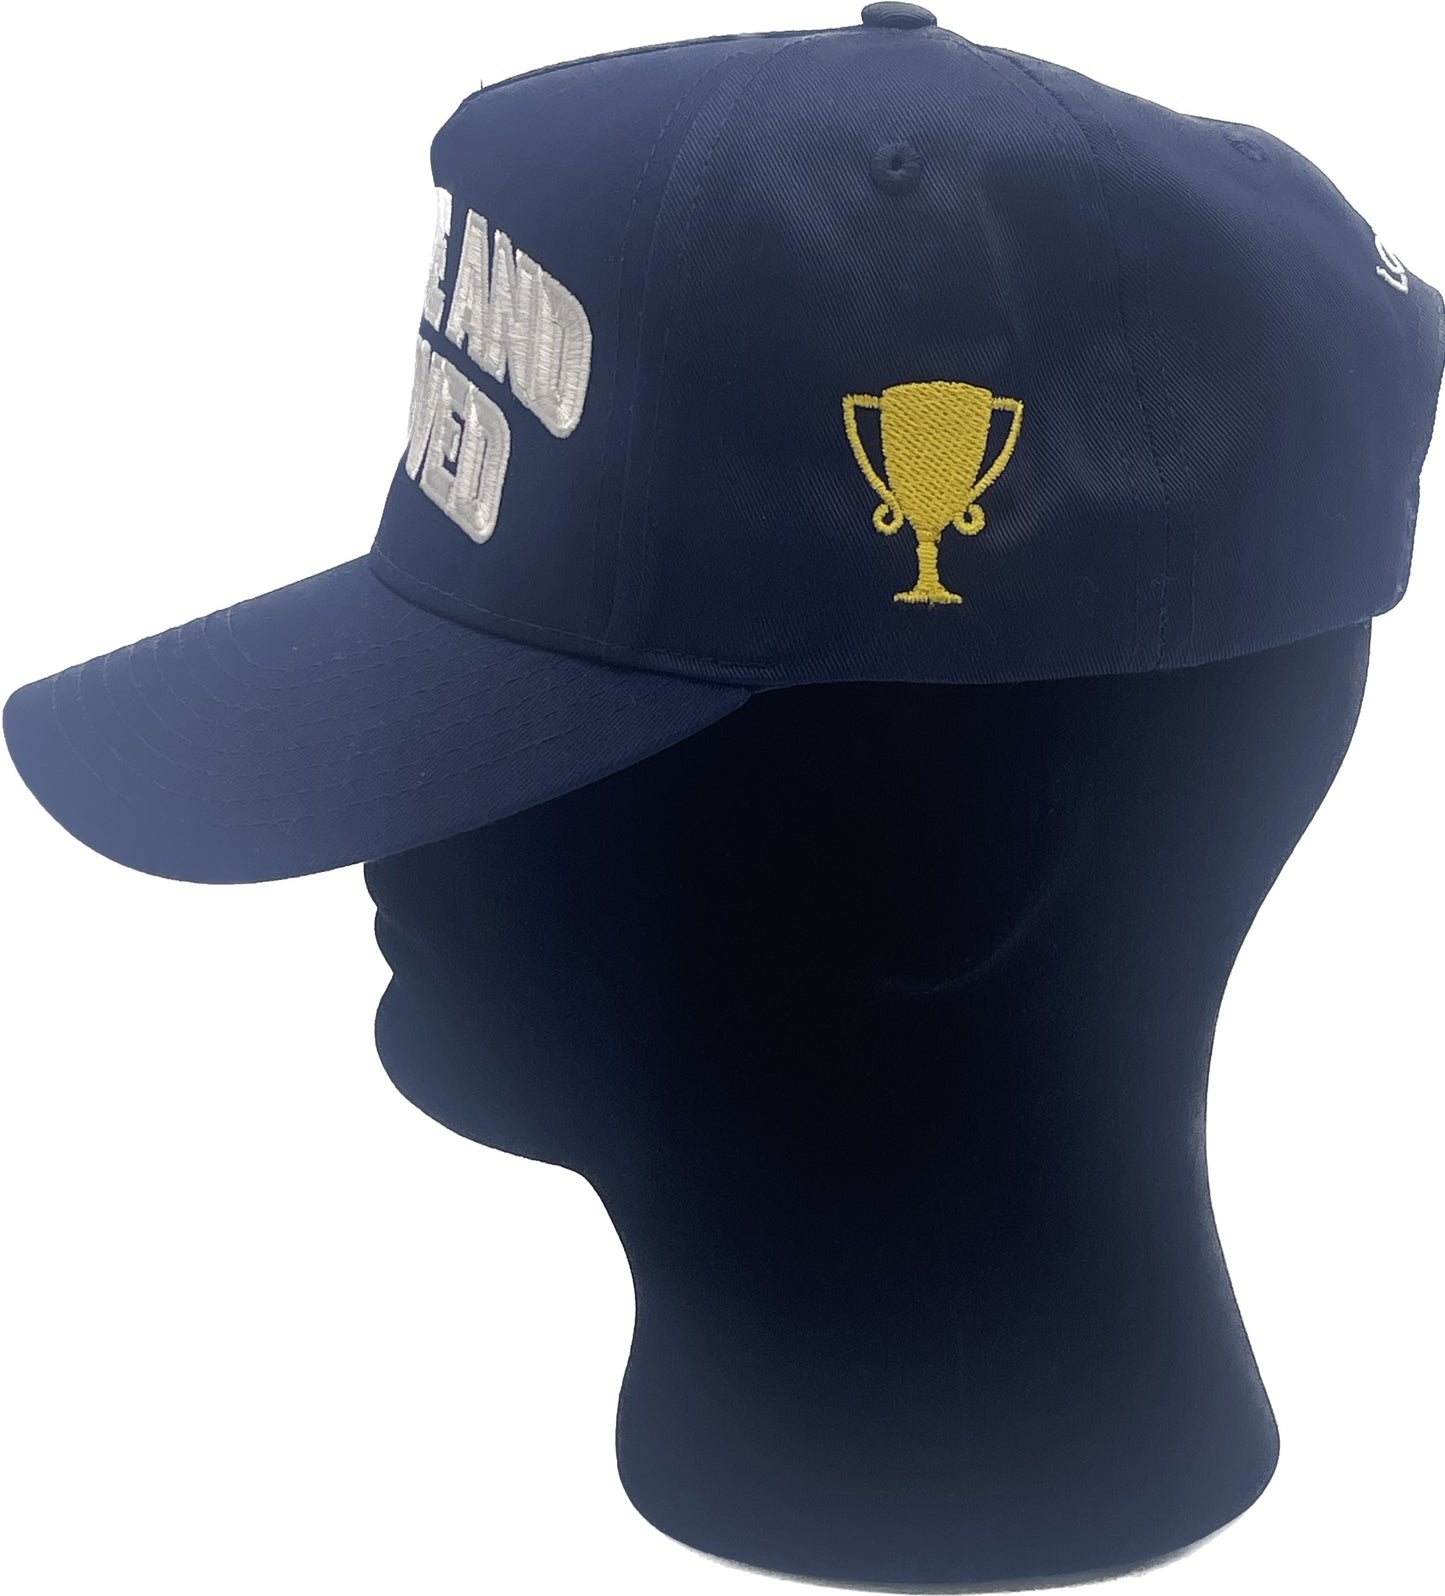 "To Loved and Be Loved"  Trophy Cap